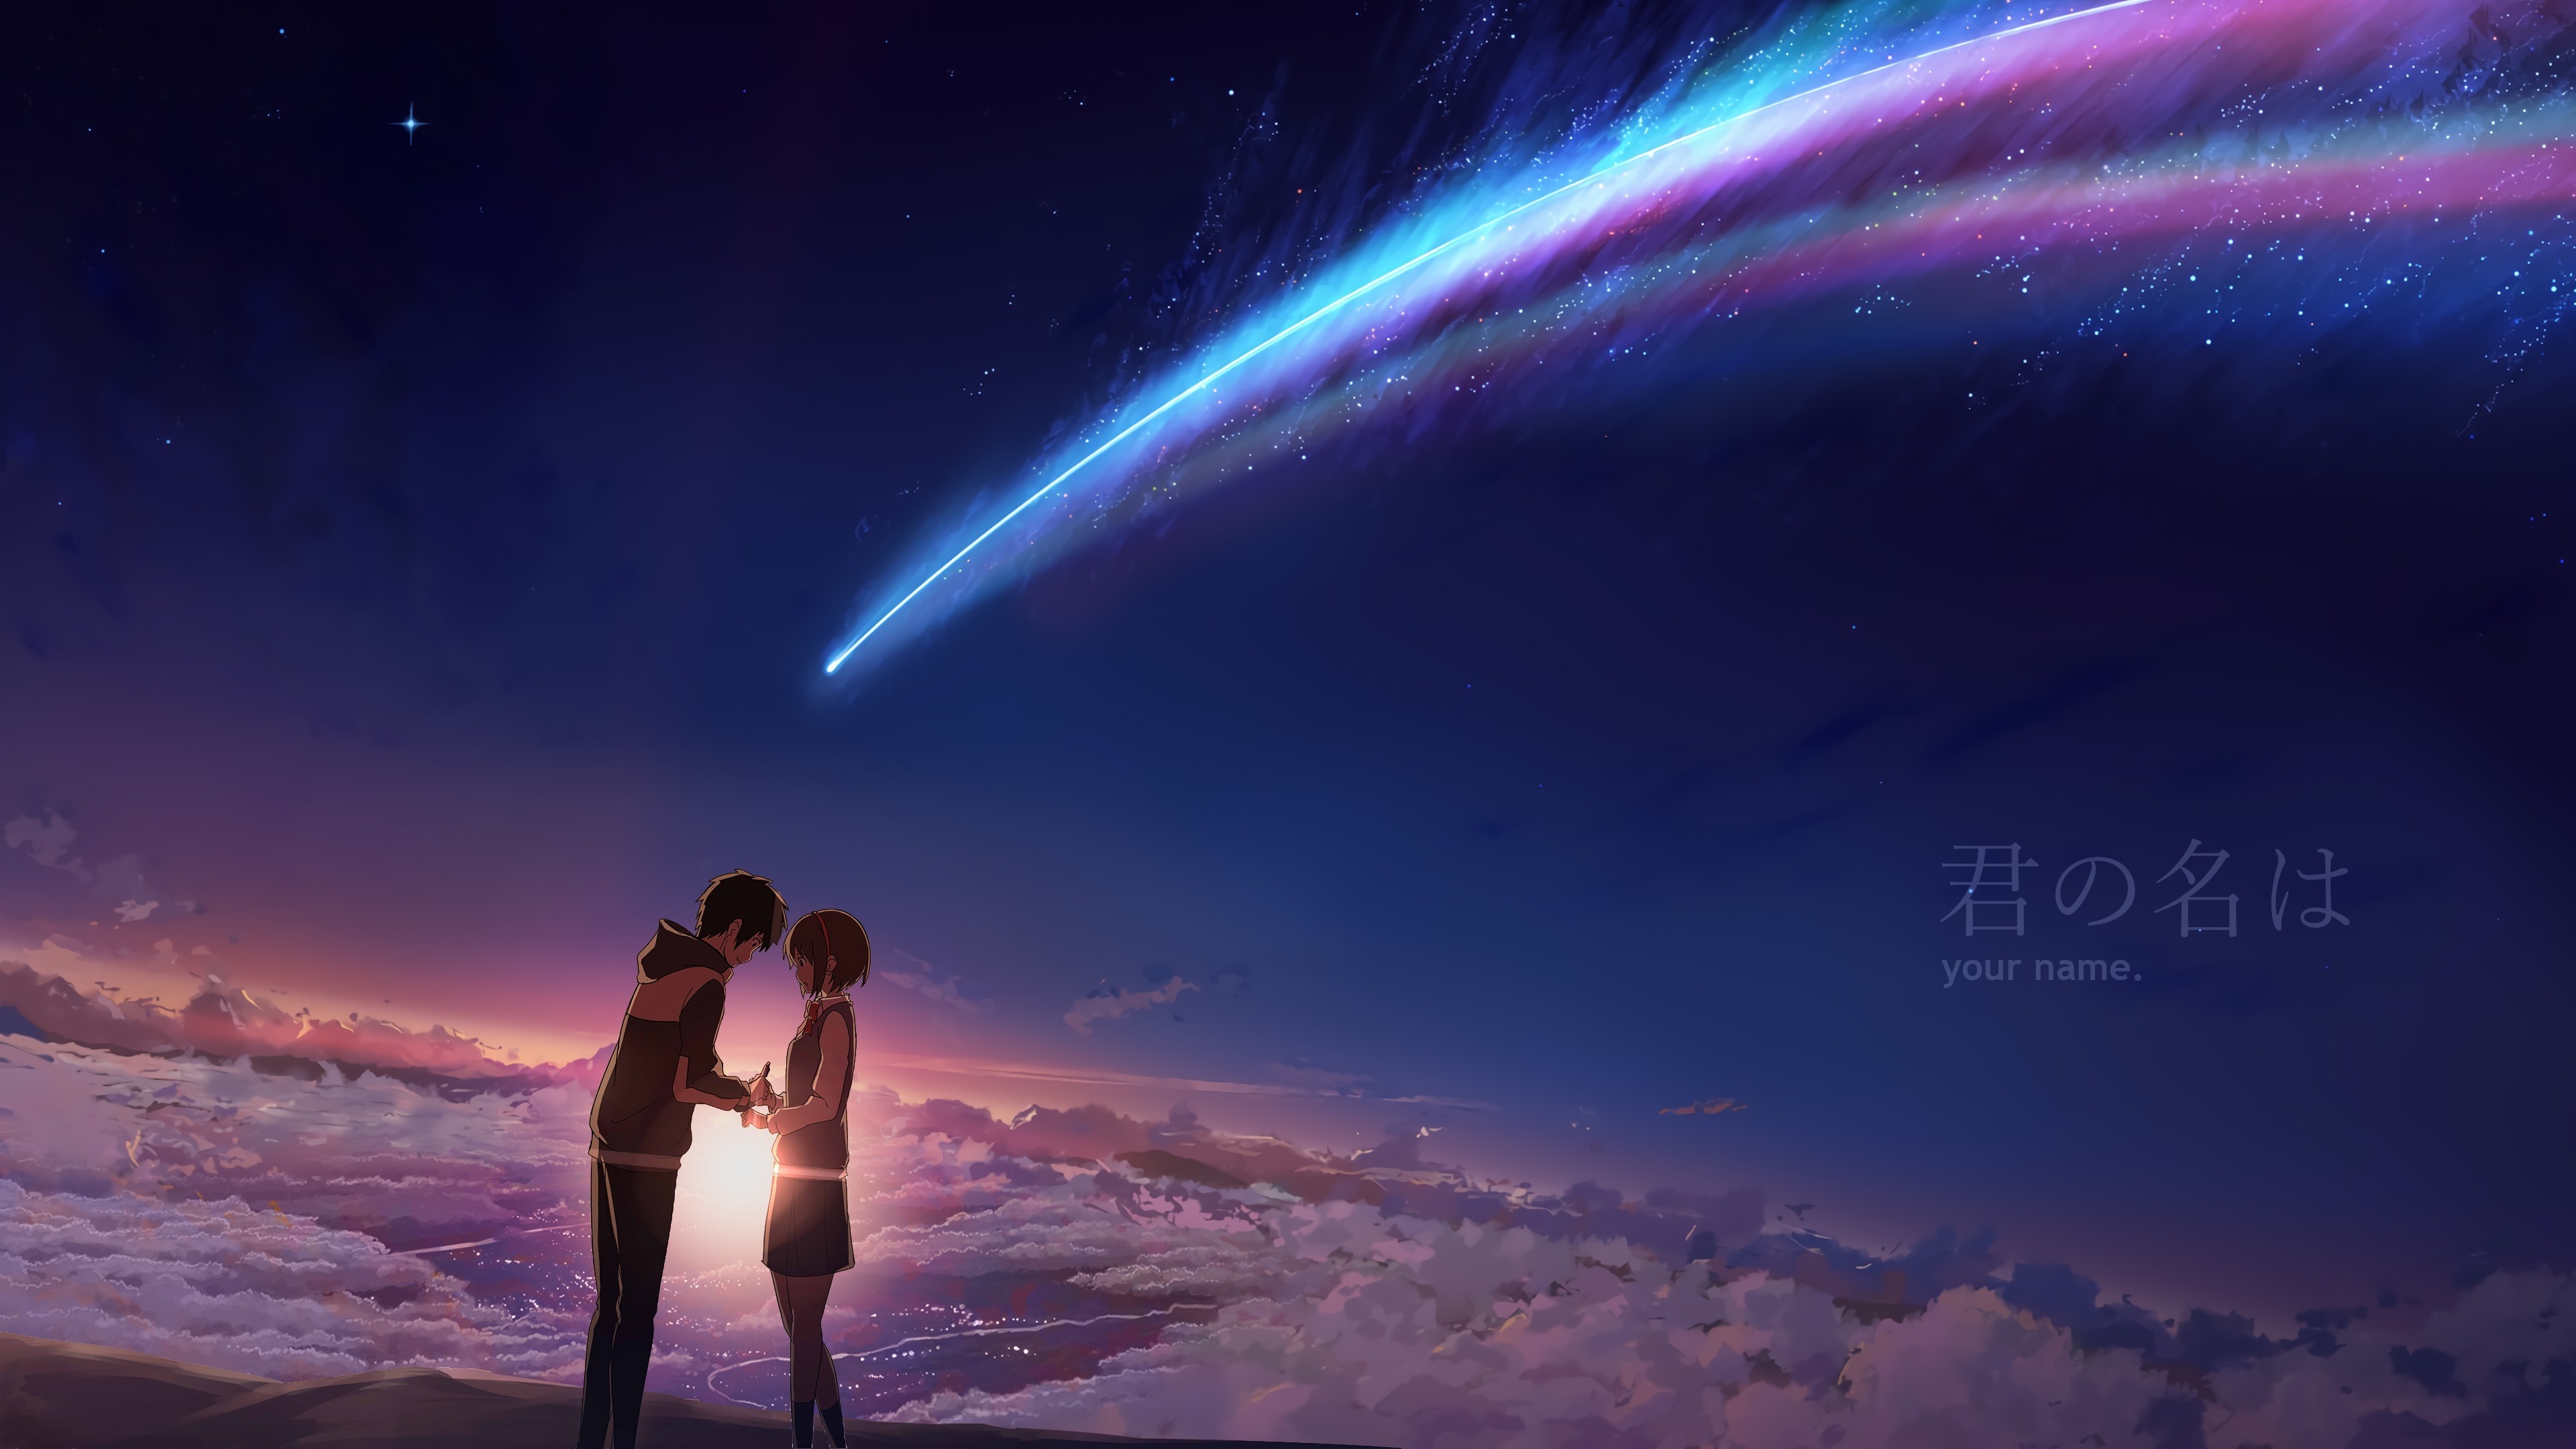 Do Mitsuha and Taki end up together? - Quora